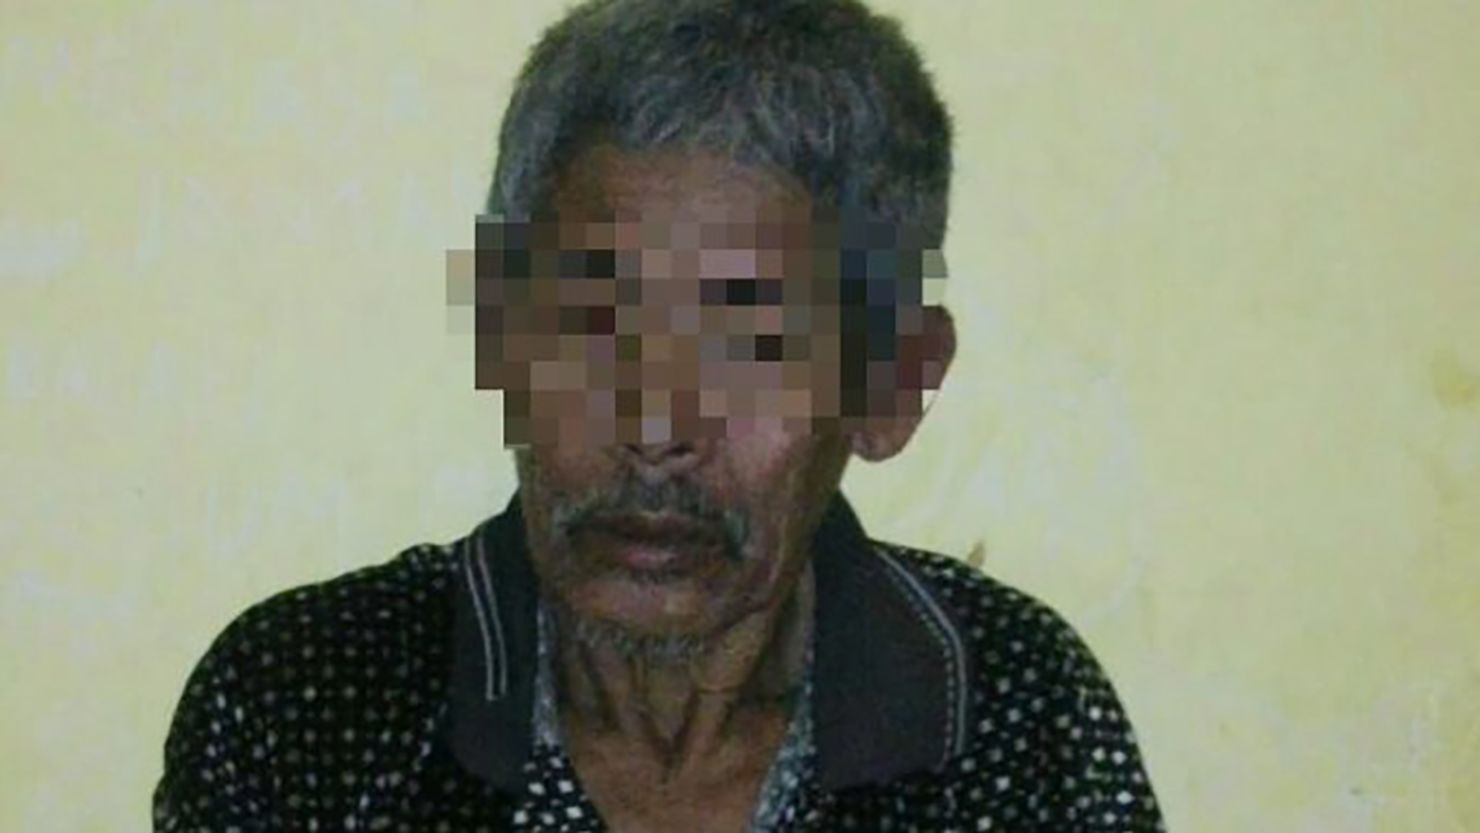 The local shaman, named only as Jago, has been charged with the kidnapping and sexual abuse of an underage girl in Indonesia.